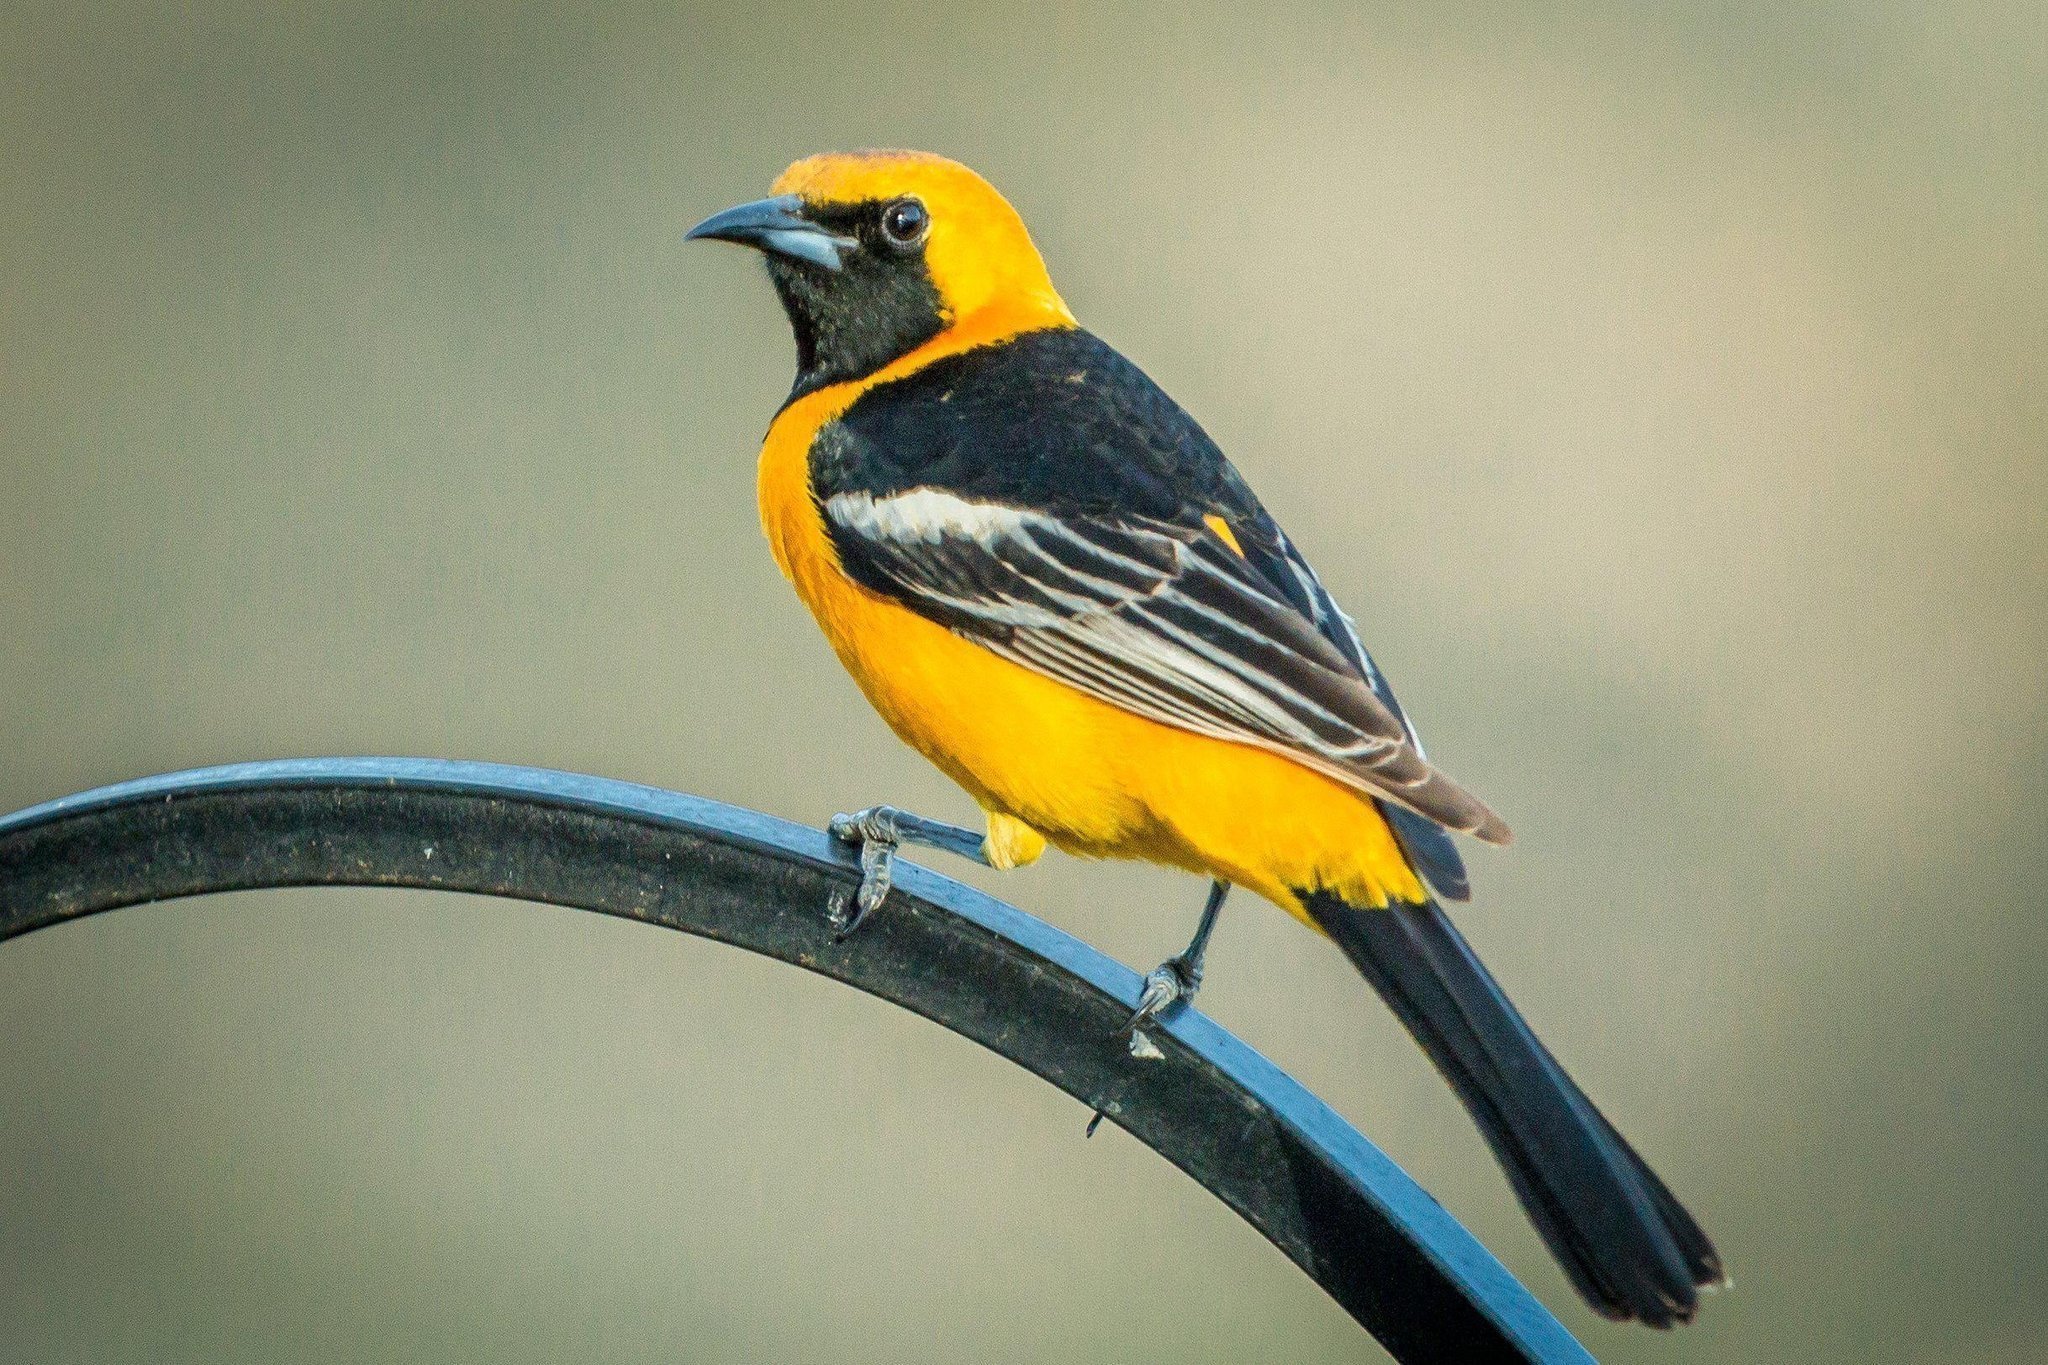 Hooded oriole arriving soon for summer nesting - The San Diego Union ...